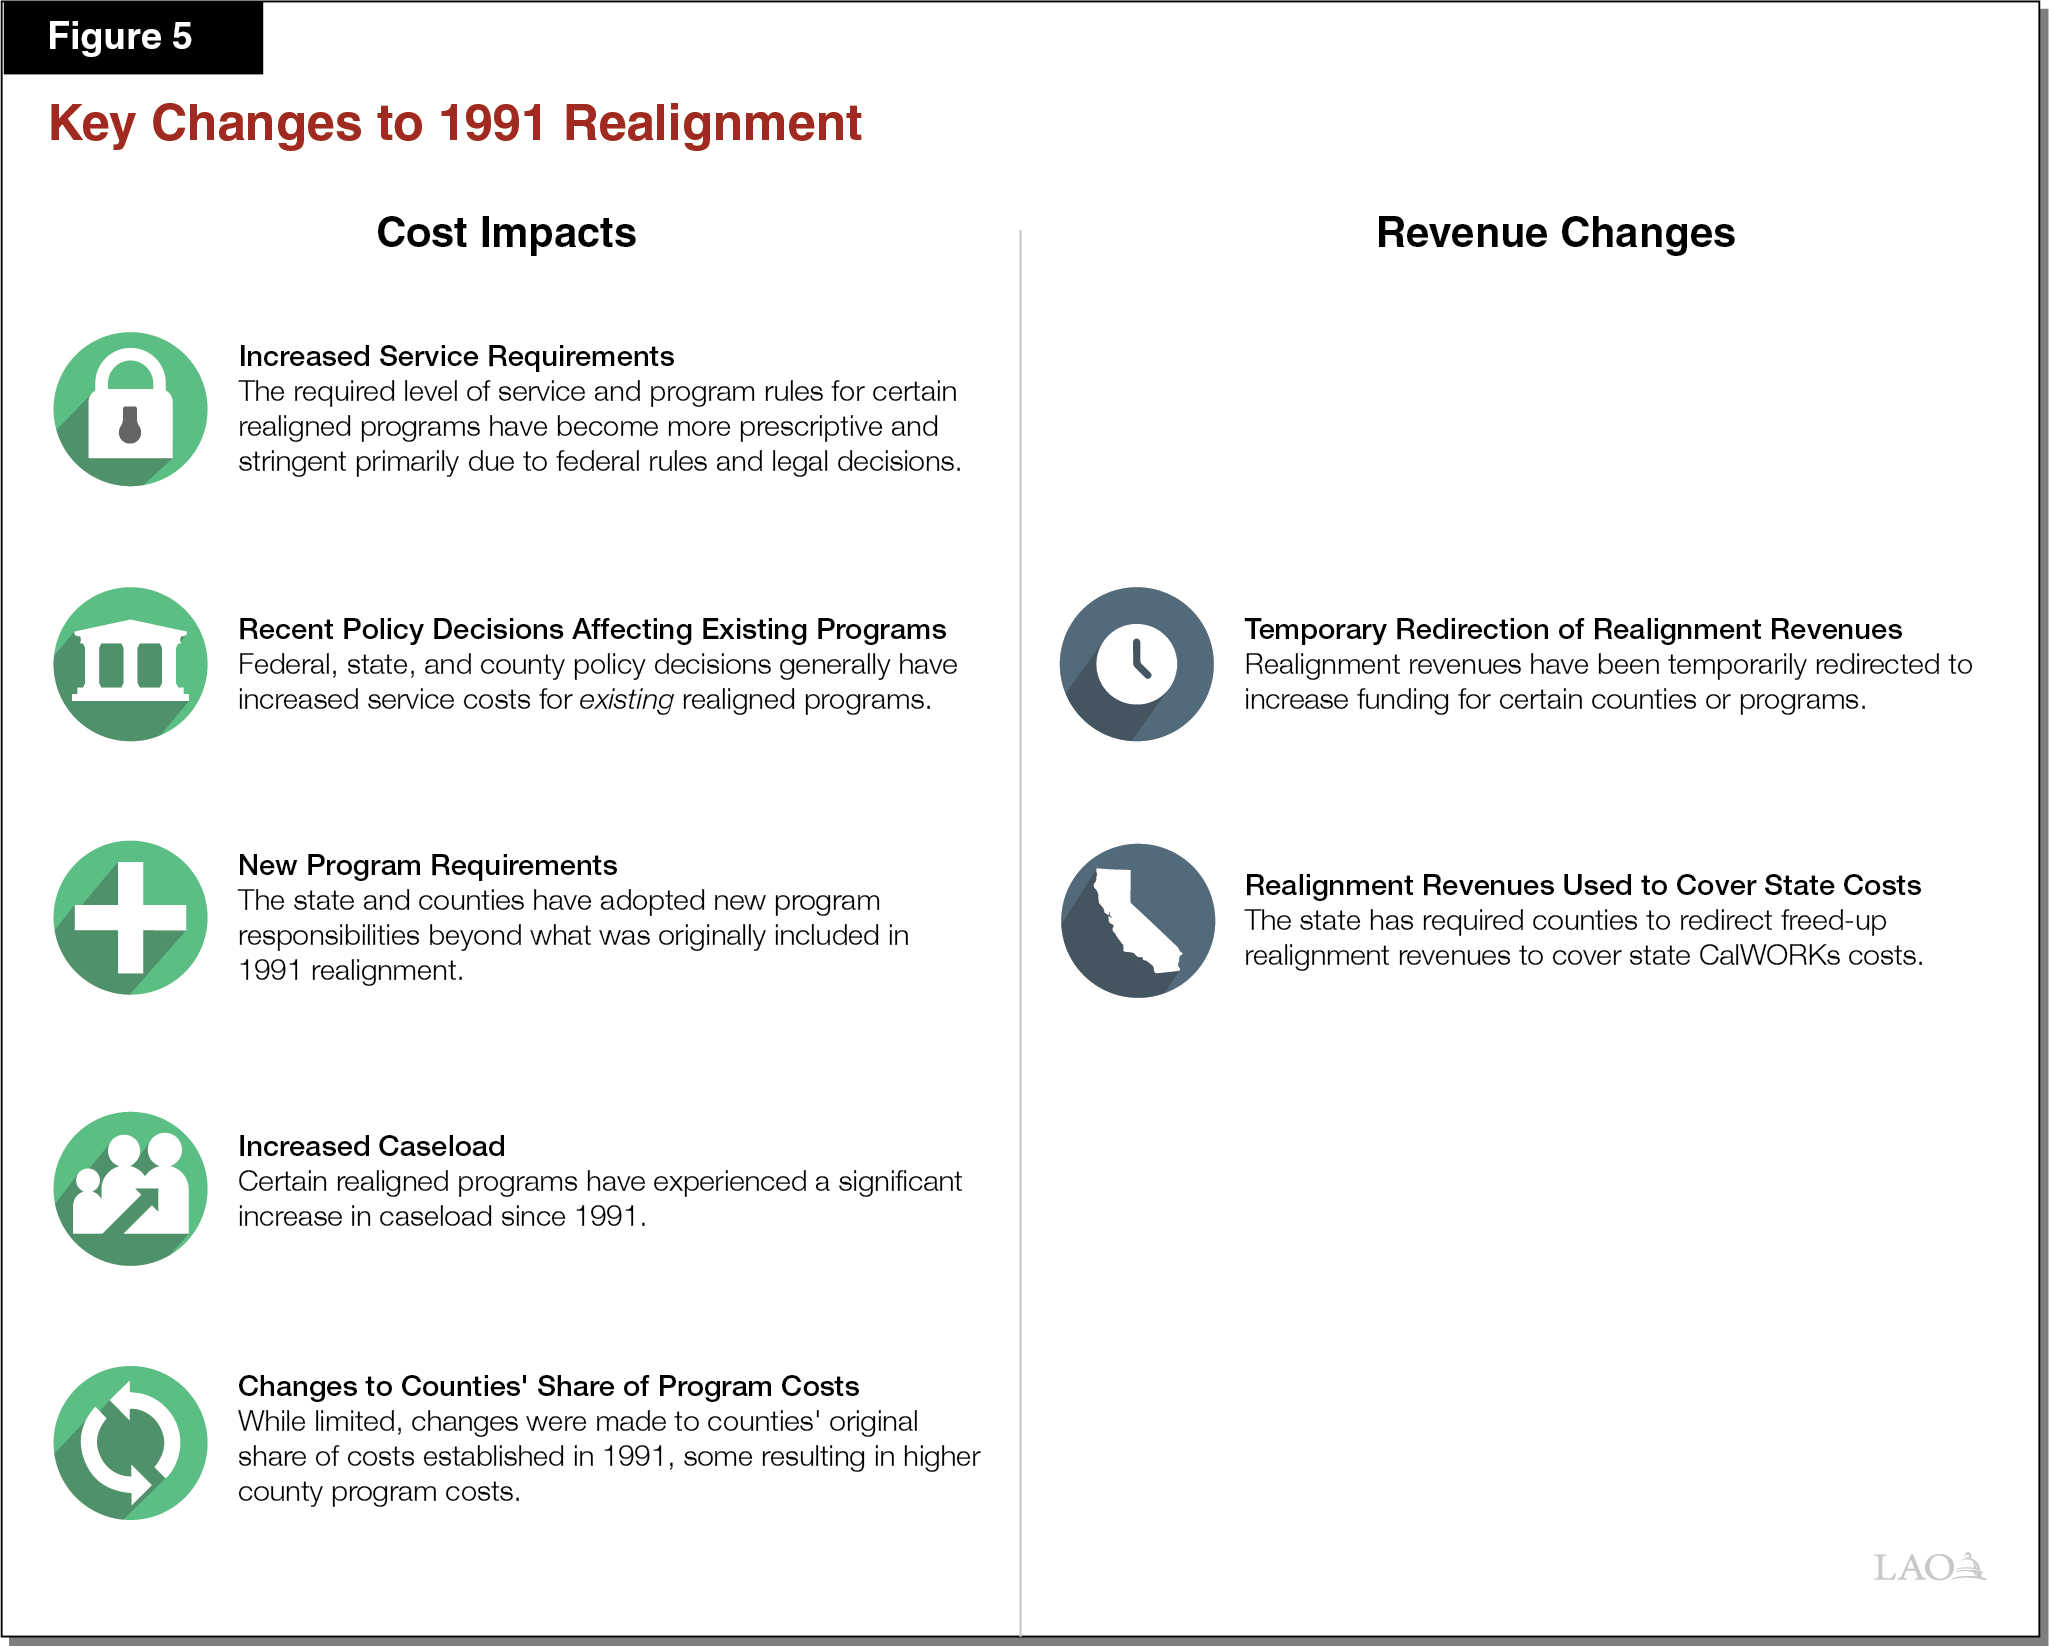 Figure 5 - Key Changes to 1991 Realignment